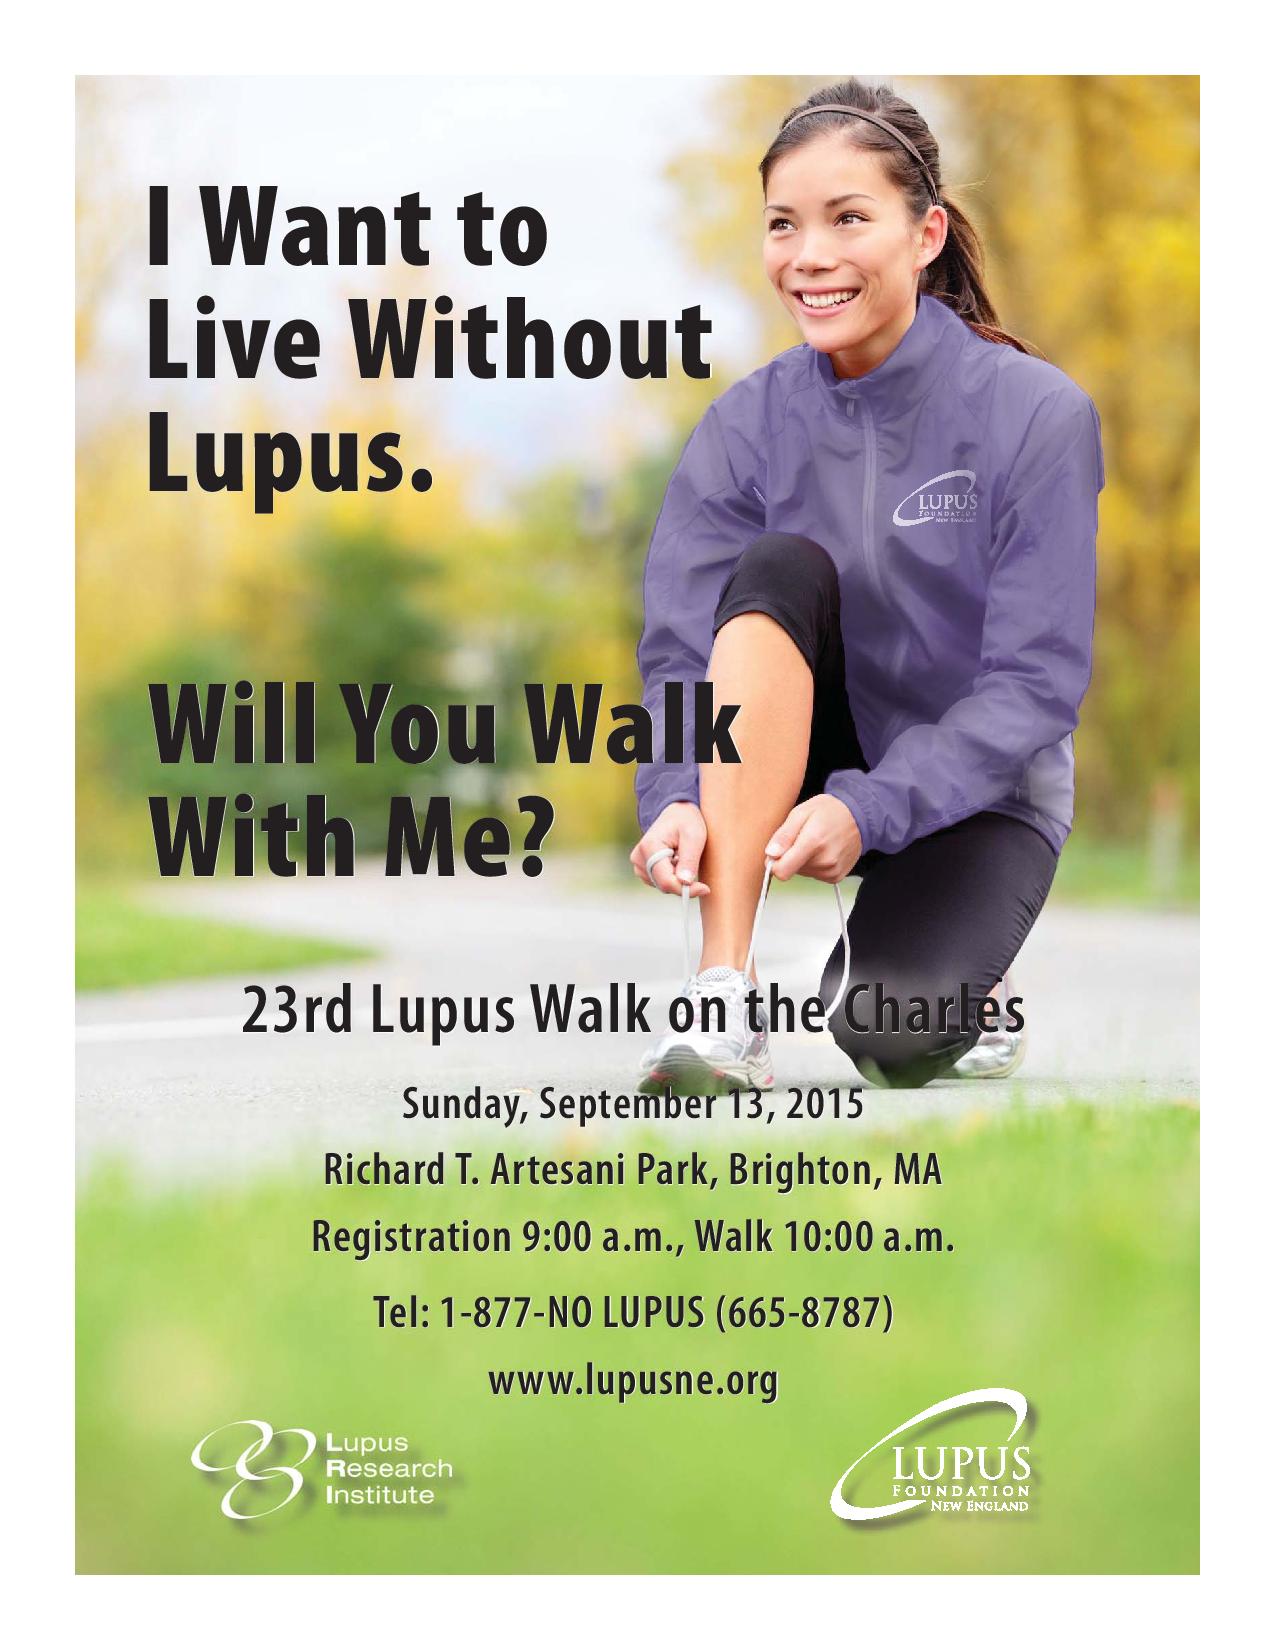 23rd Annual Lupus Walk on the Charles Boston Charity EventsBoston